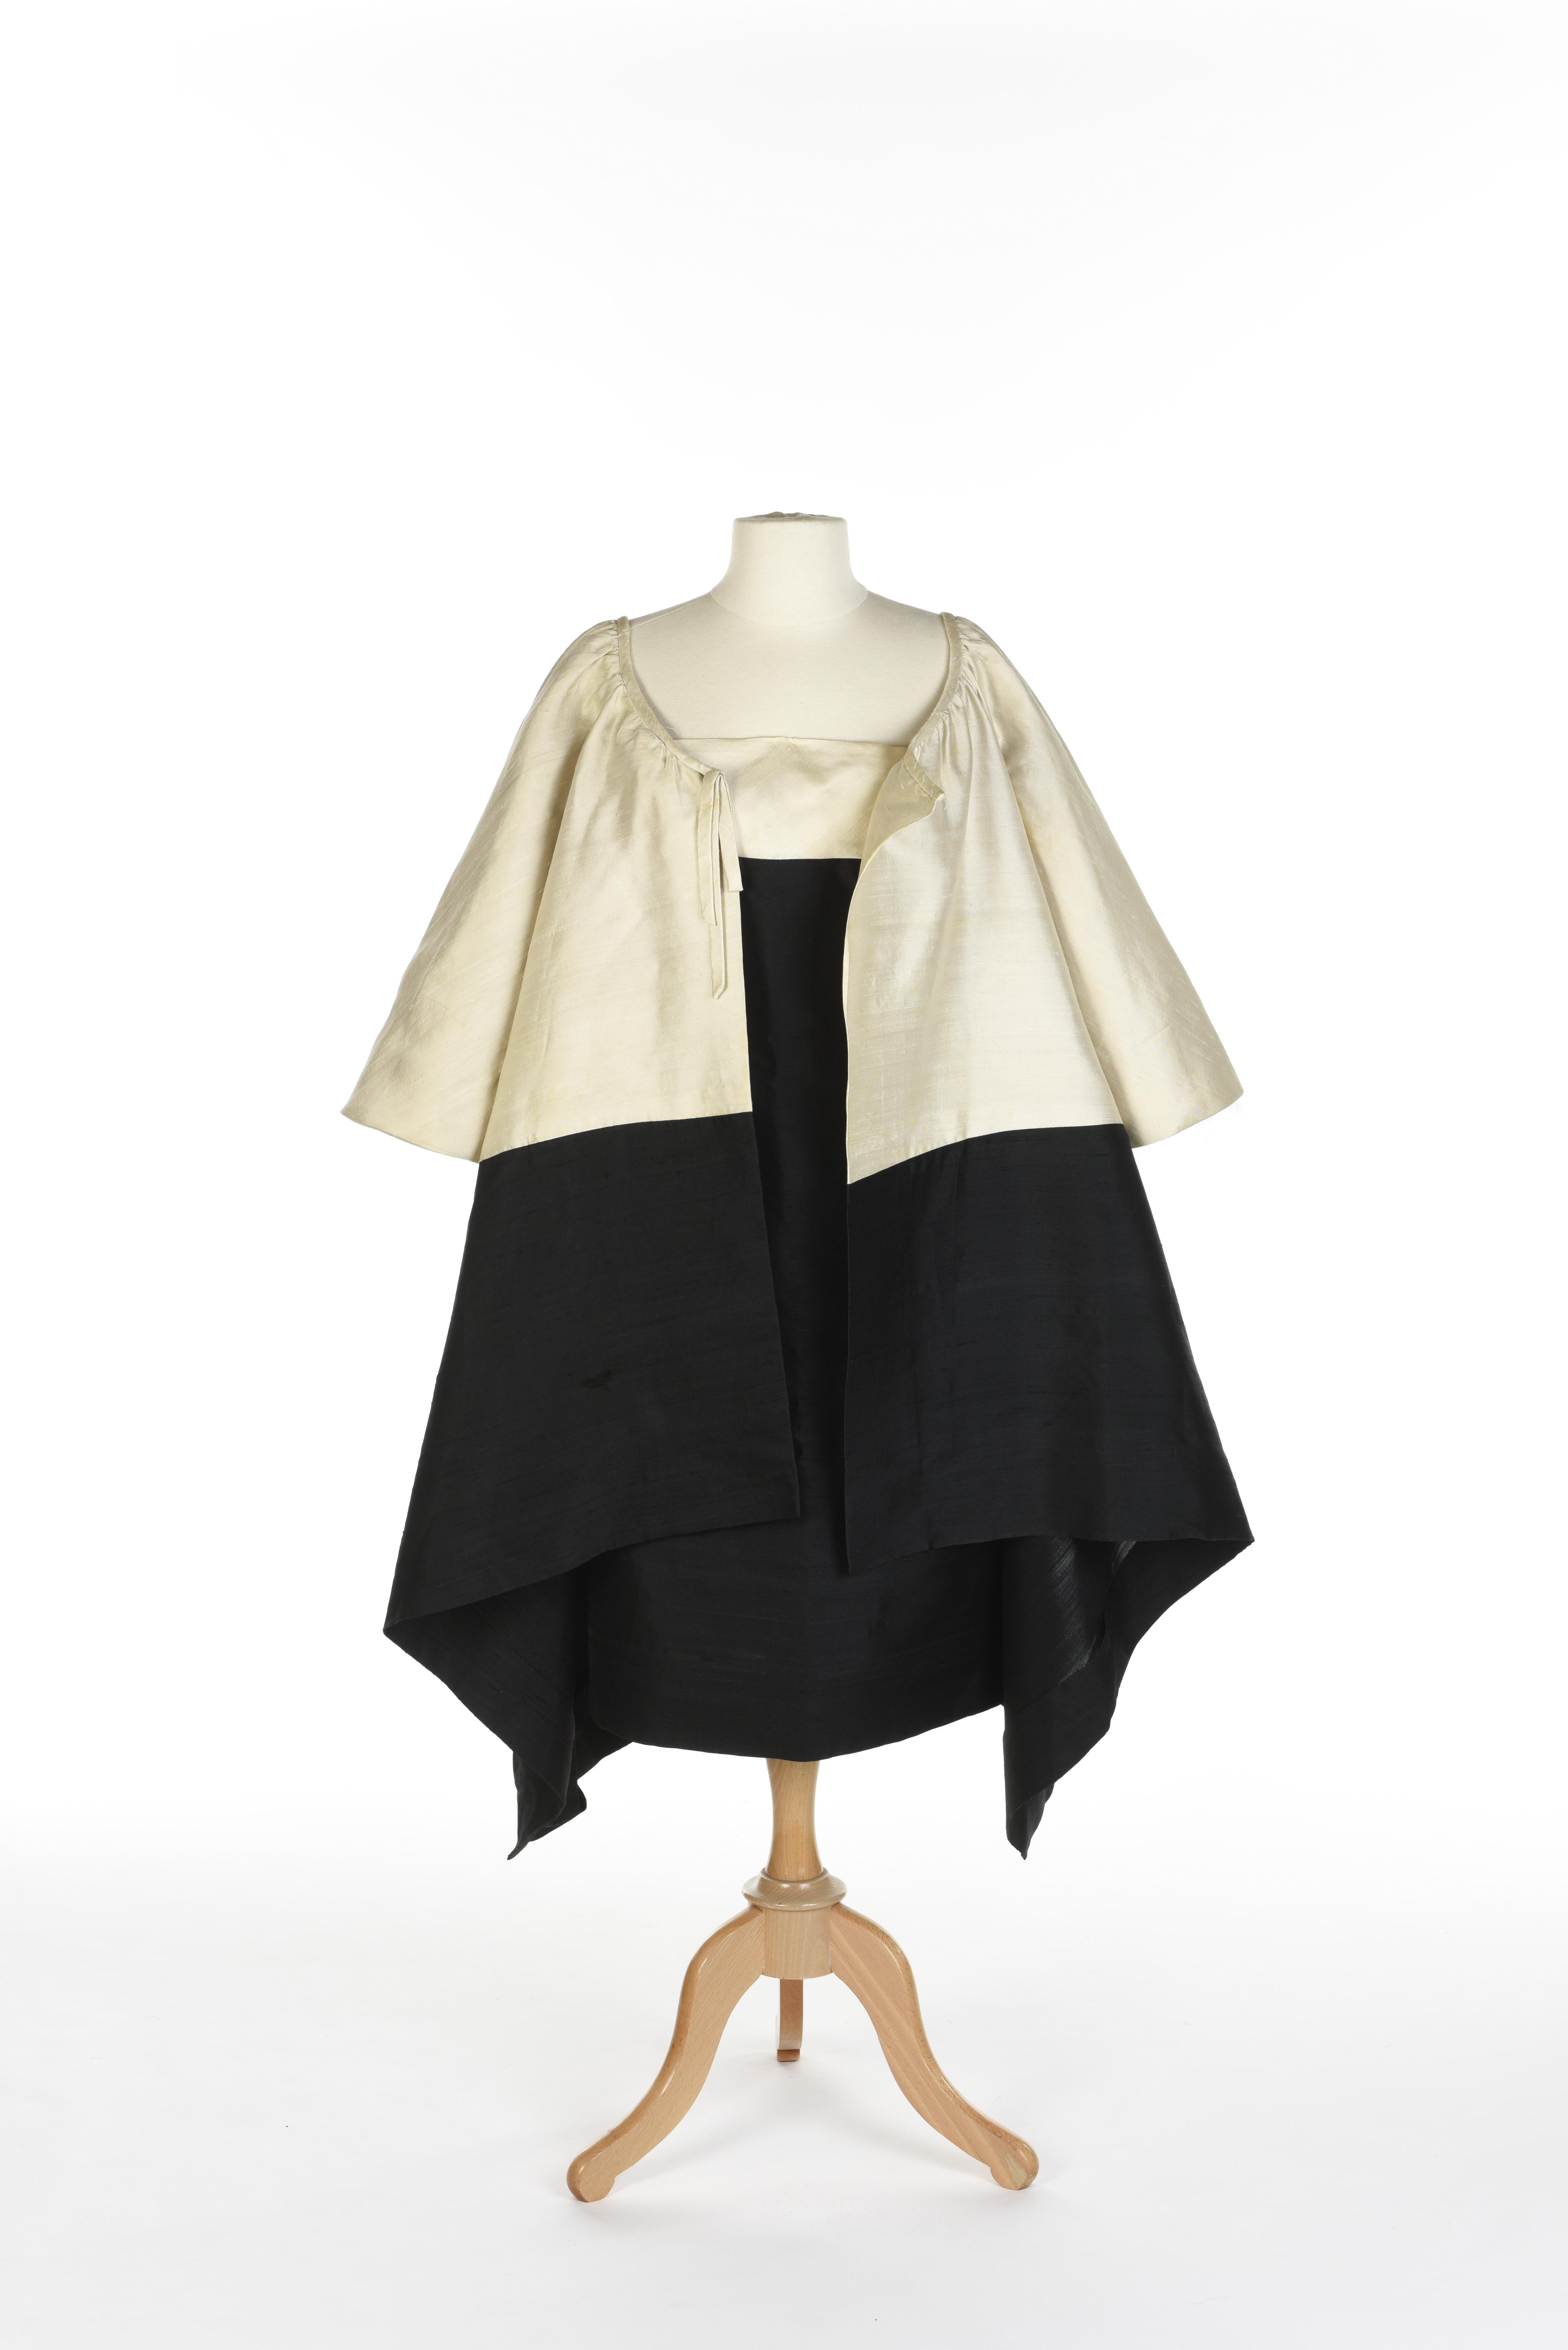 An Hubert de Givenchy French Couture Cream and Black silk Evening Set Circa 1965 For Sale 10